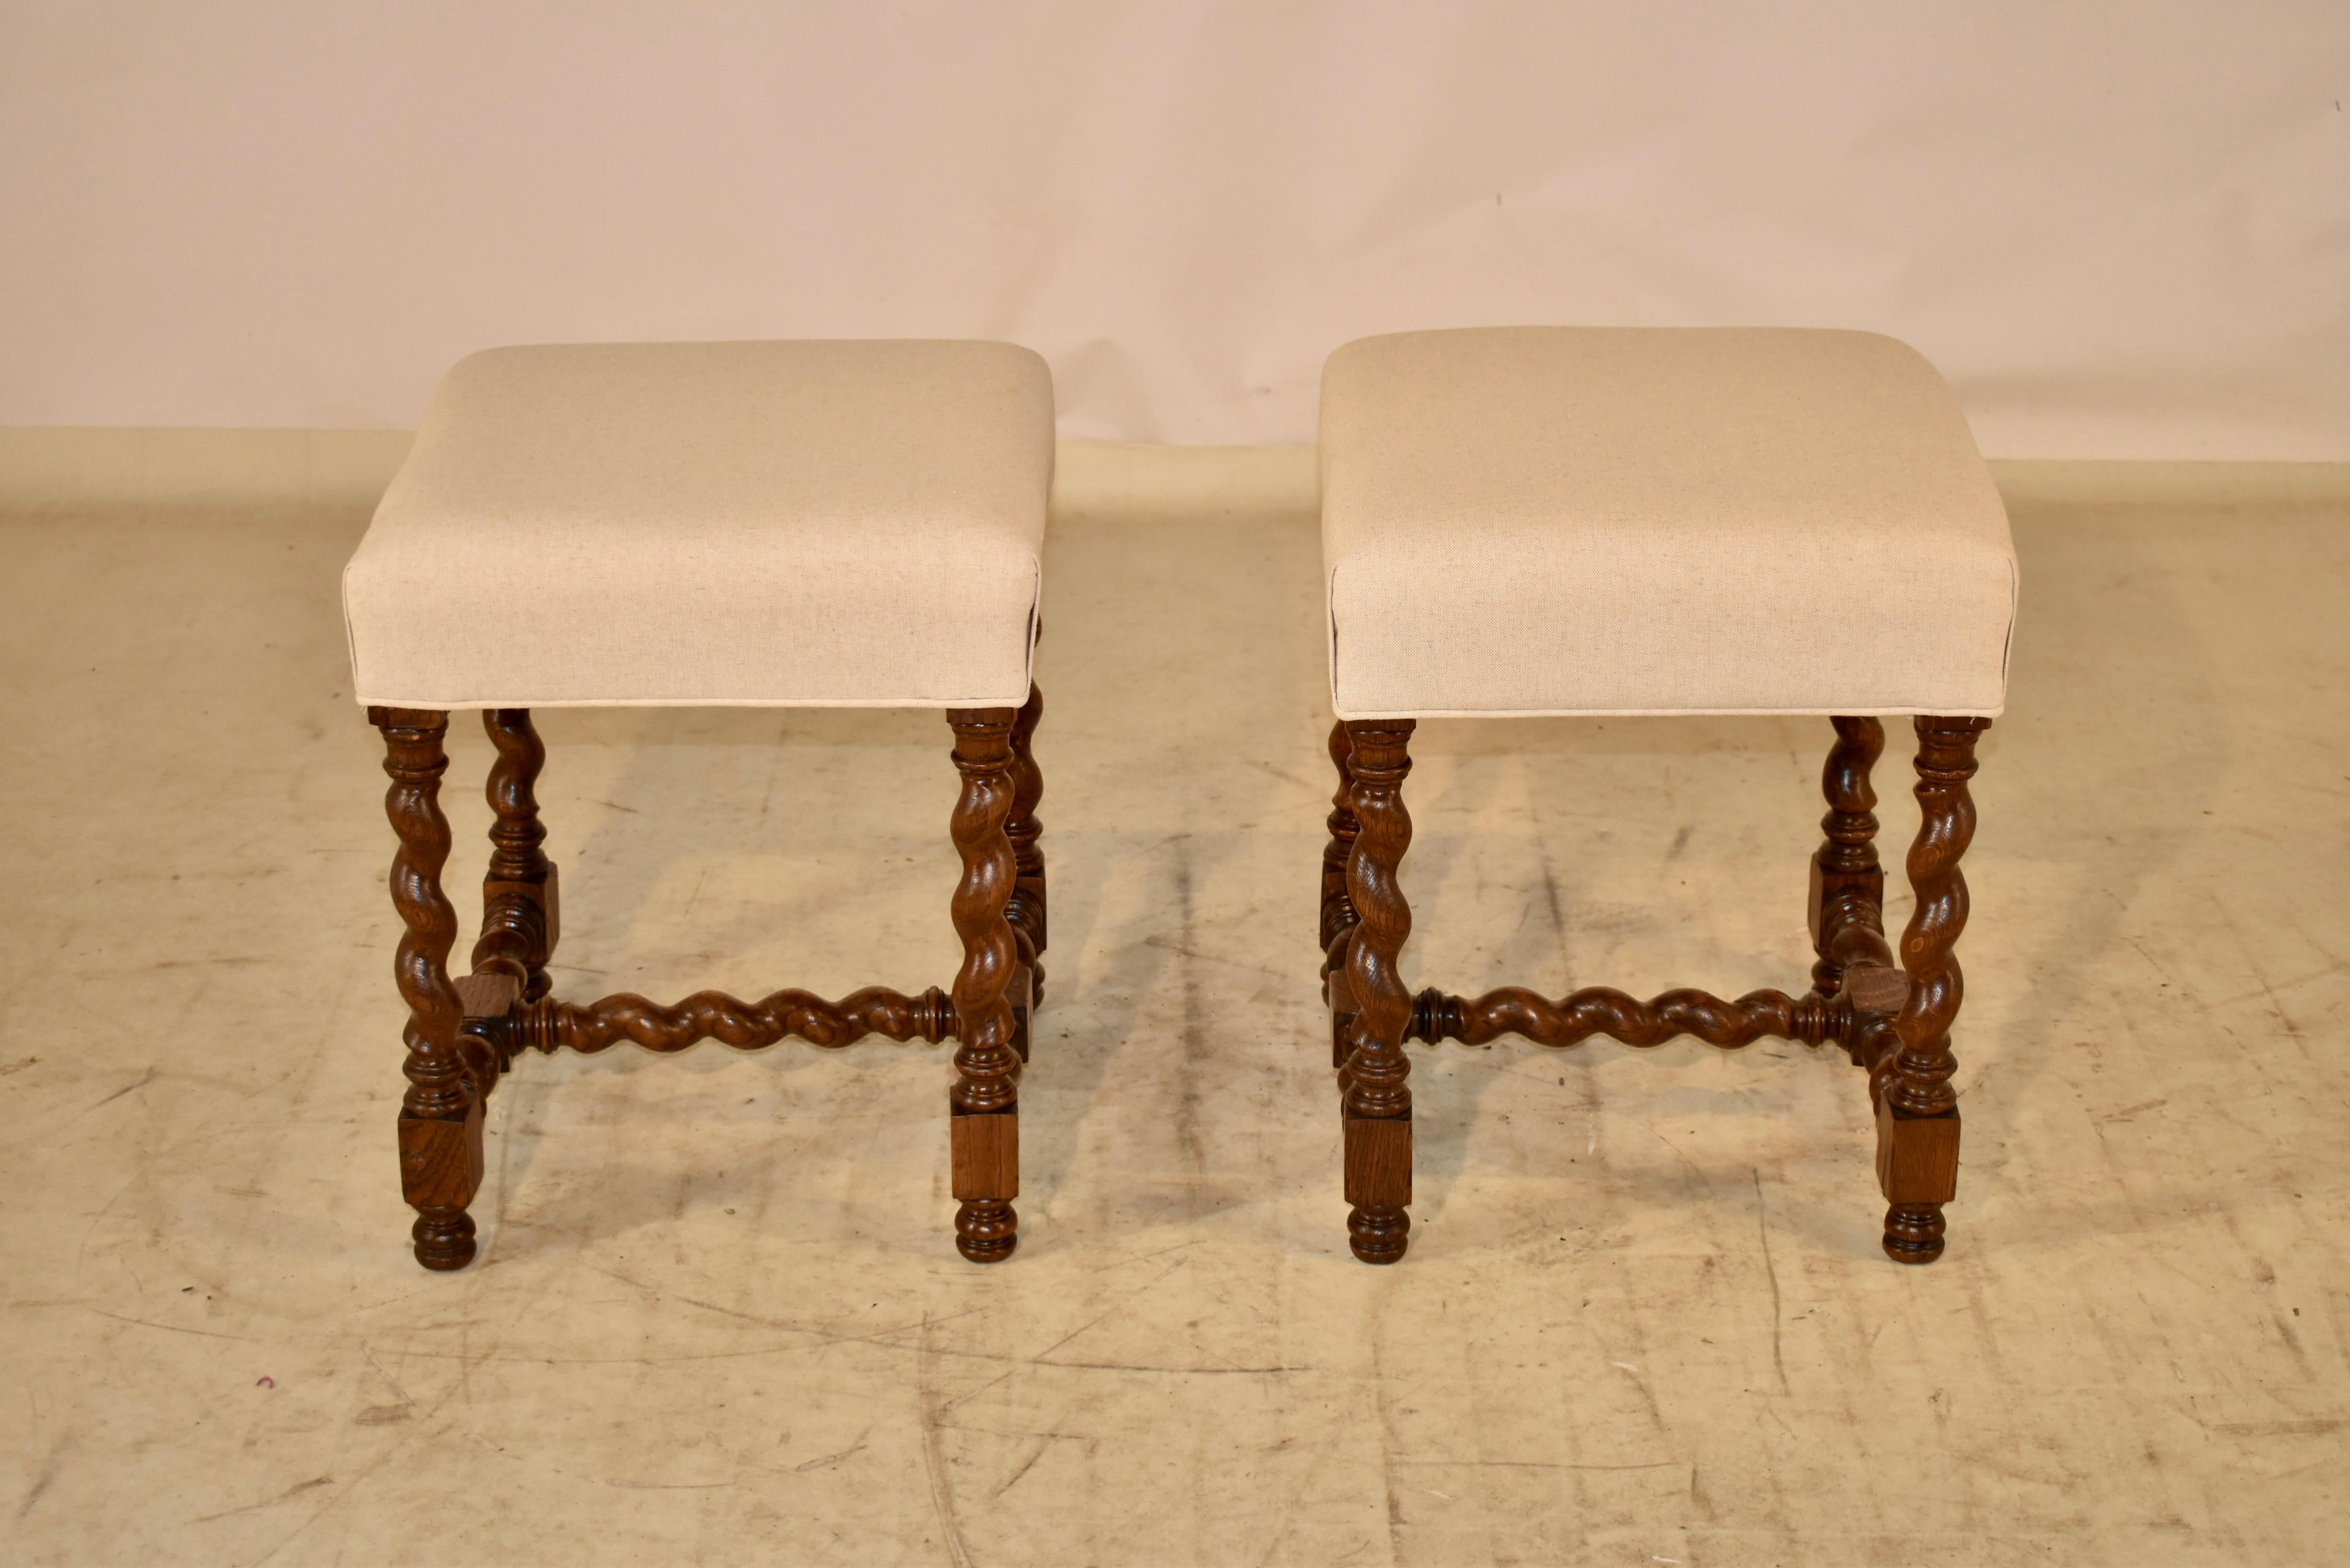 Lovely pair of 19th century oak stools from France with newly upholstered seats in linen. The bases are made from oak and have gorgeous hand turned barley twist legs, joined by a matching stretcher. Supported on hand turned feet.